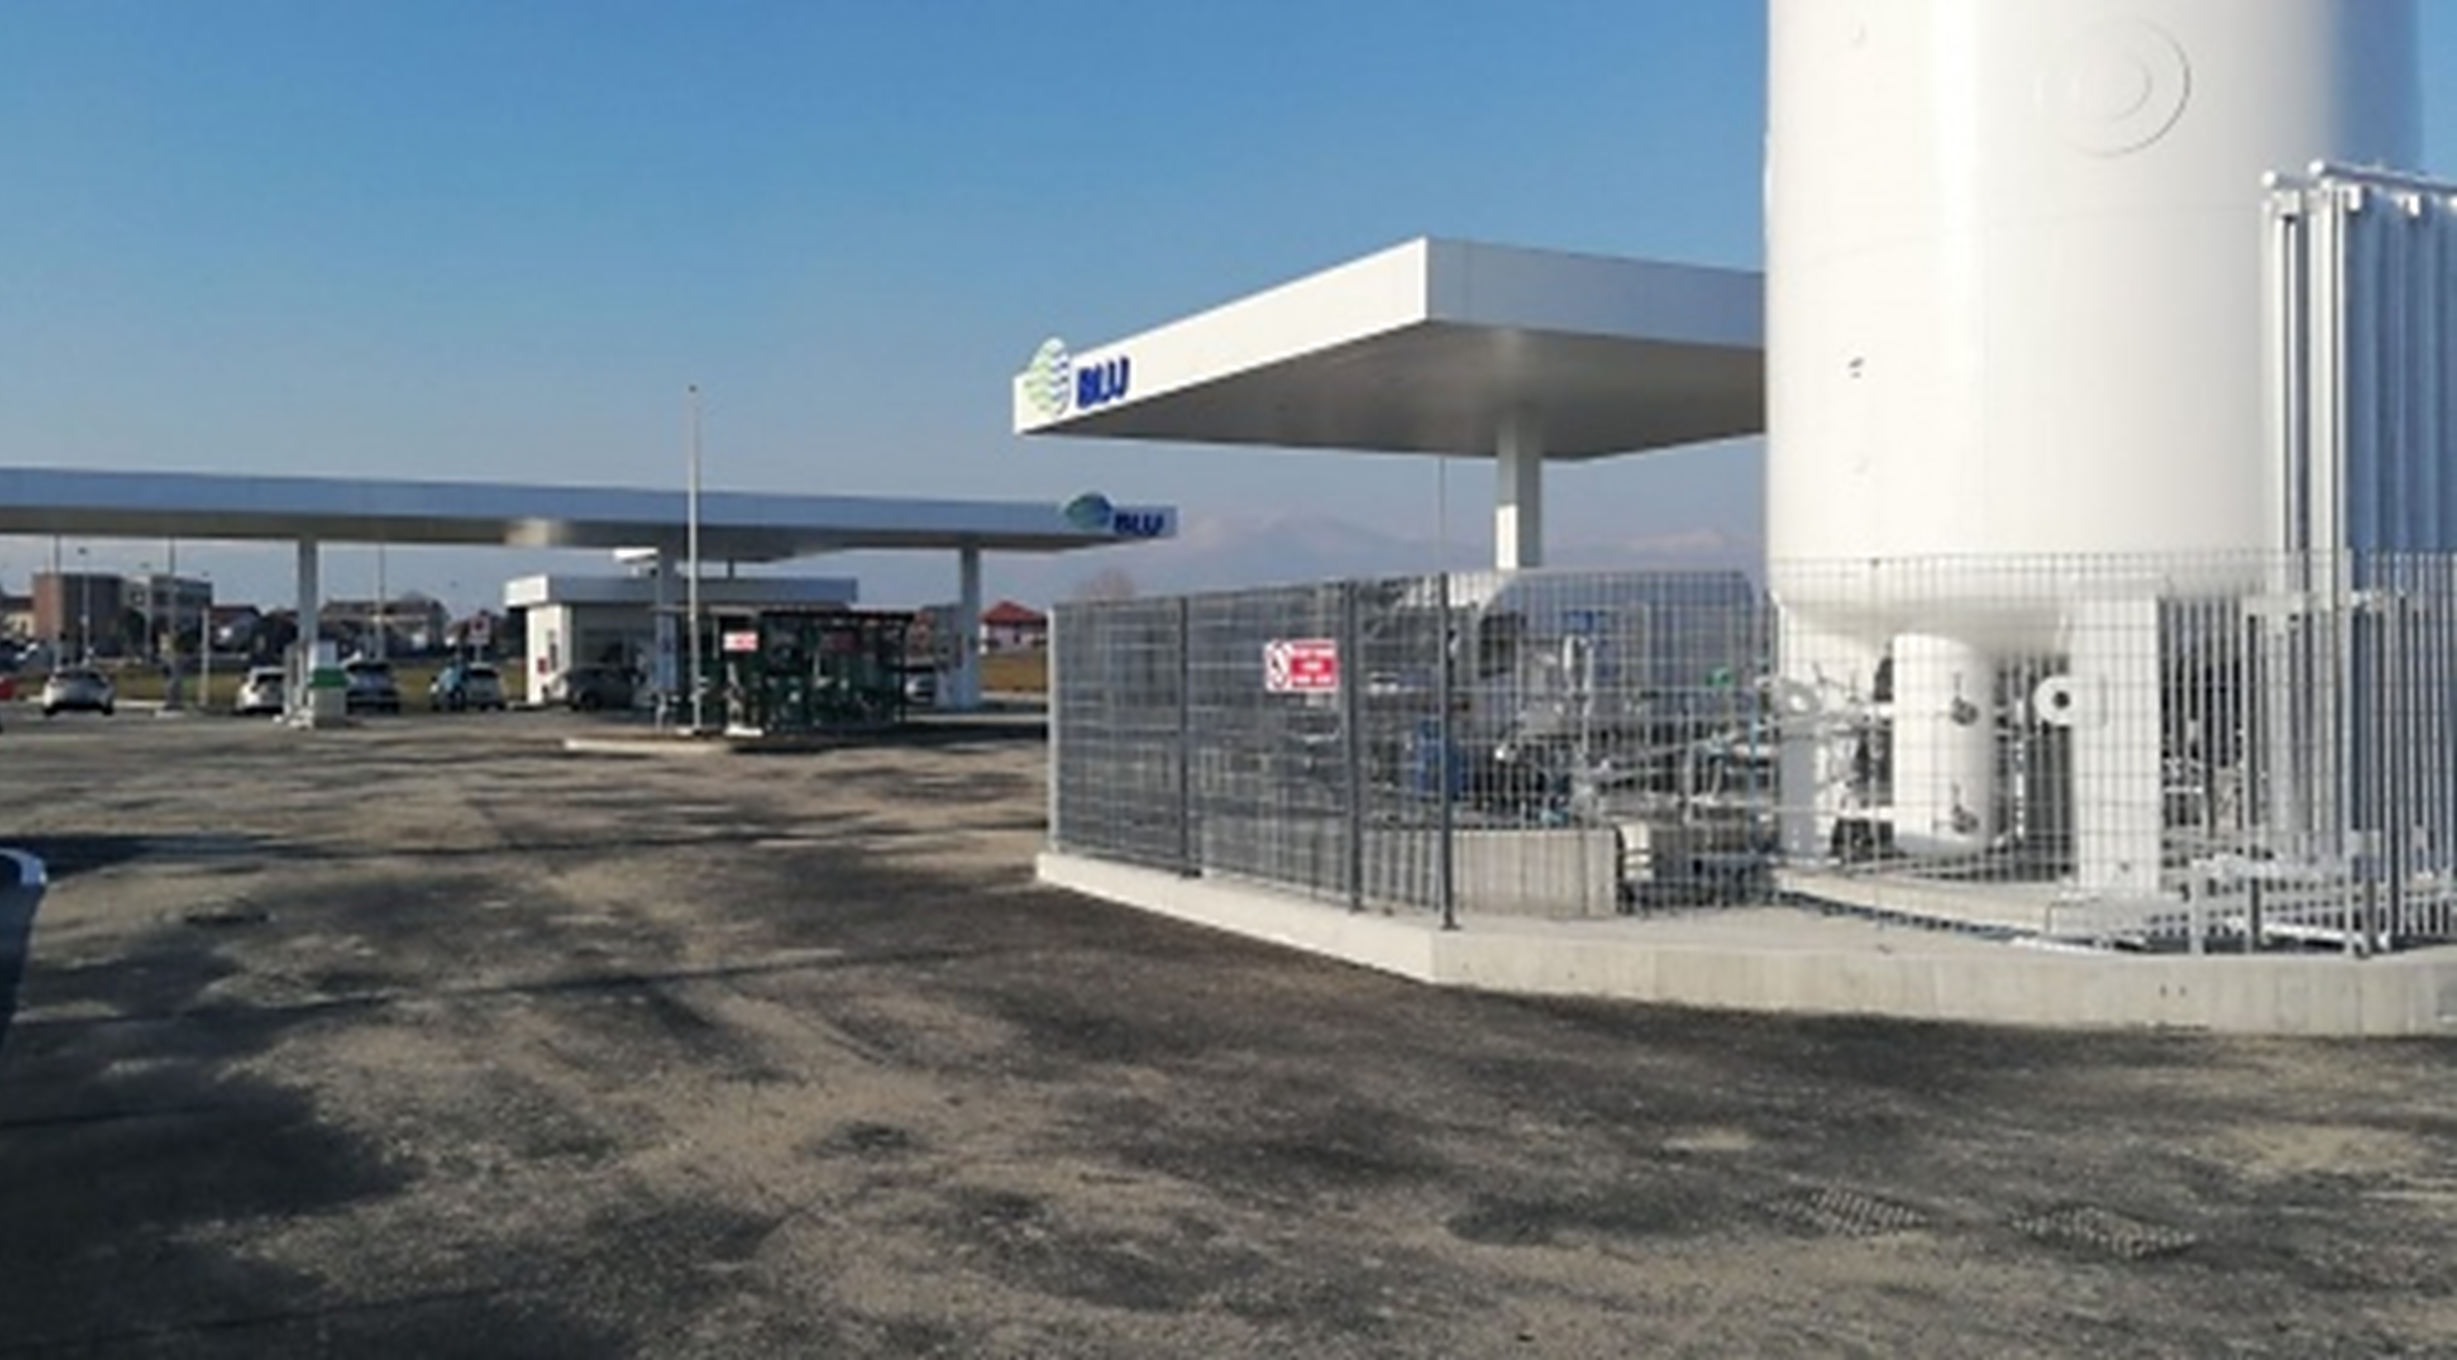 New LNG plant in San Maurizio Canavese (Turin)